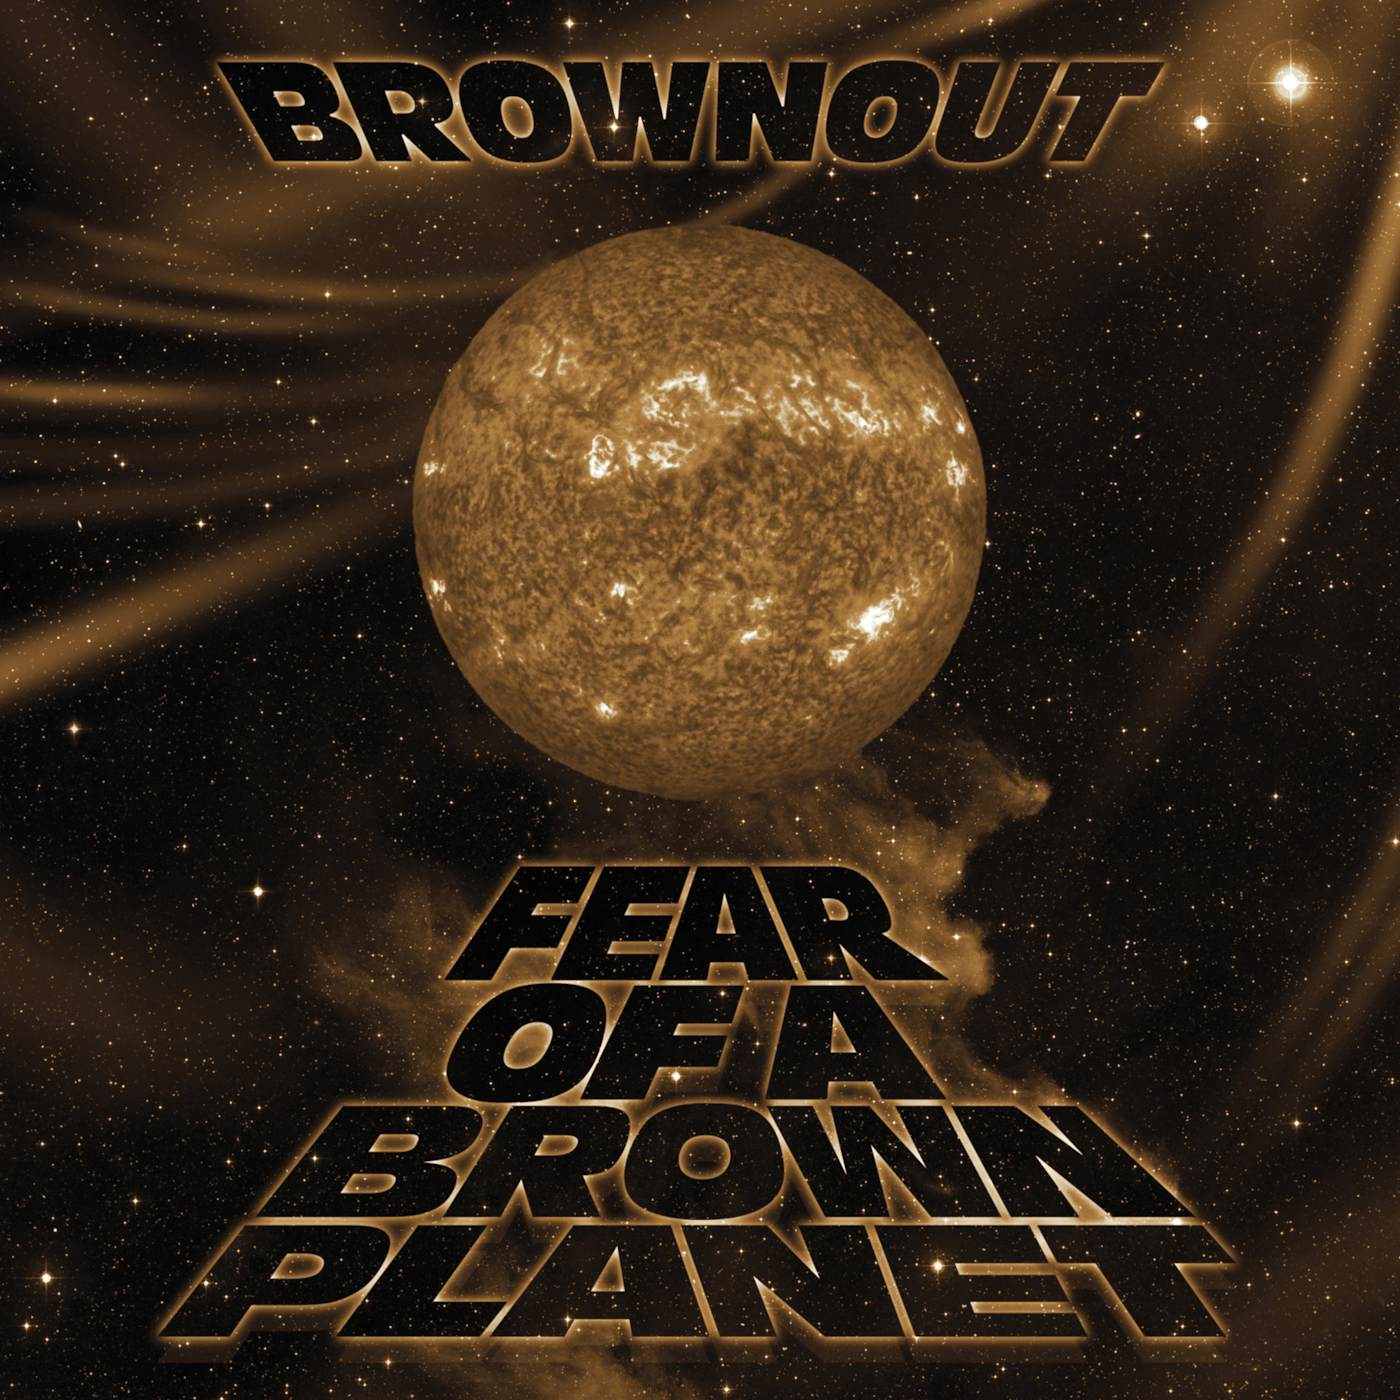 Brownout Fear Of A Brown Planet Vinyl Record